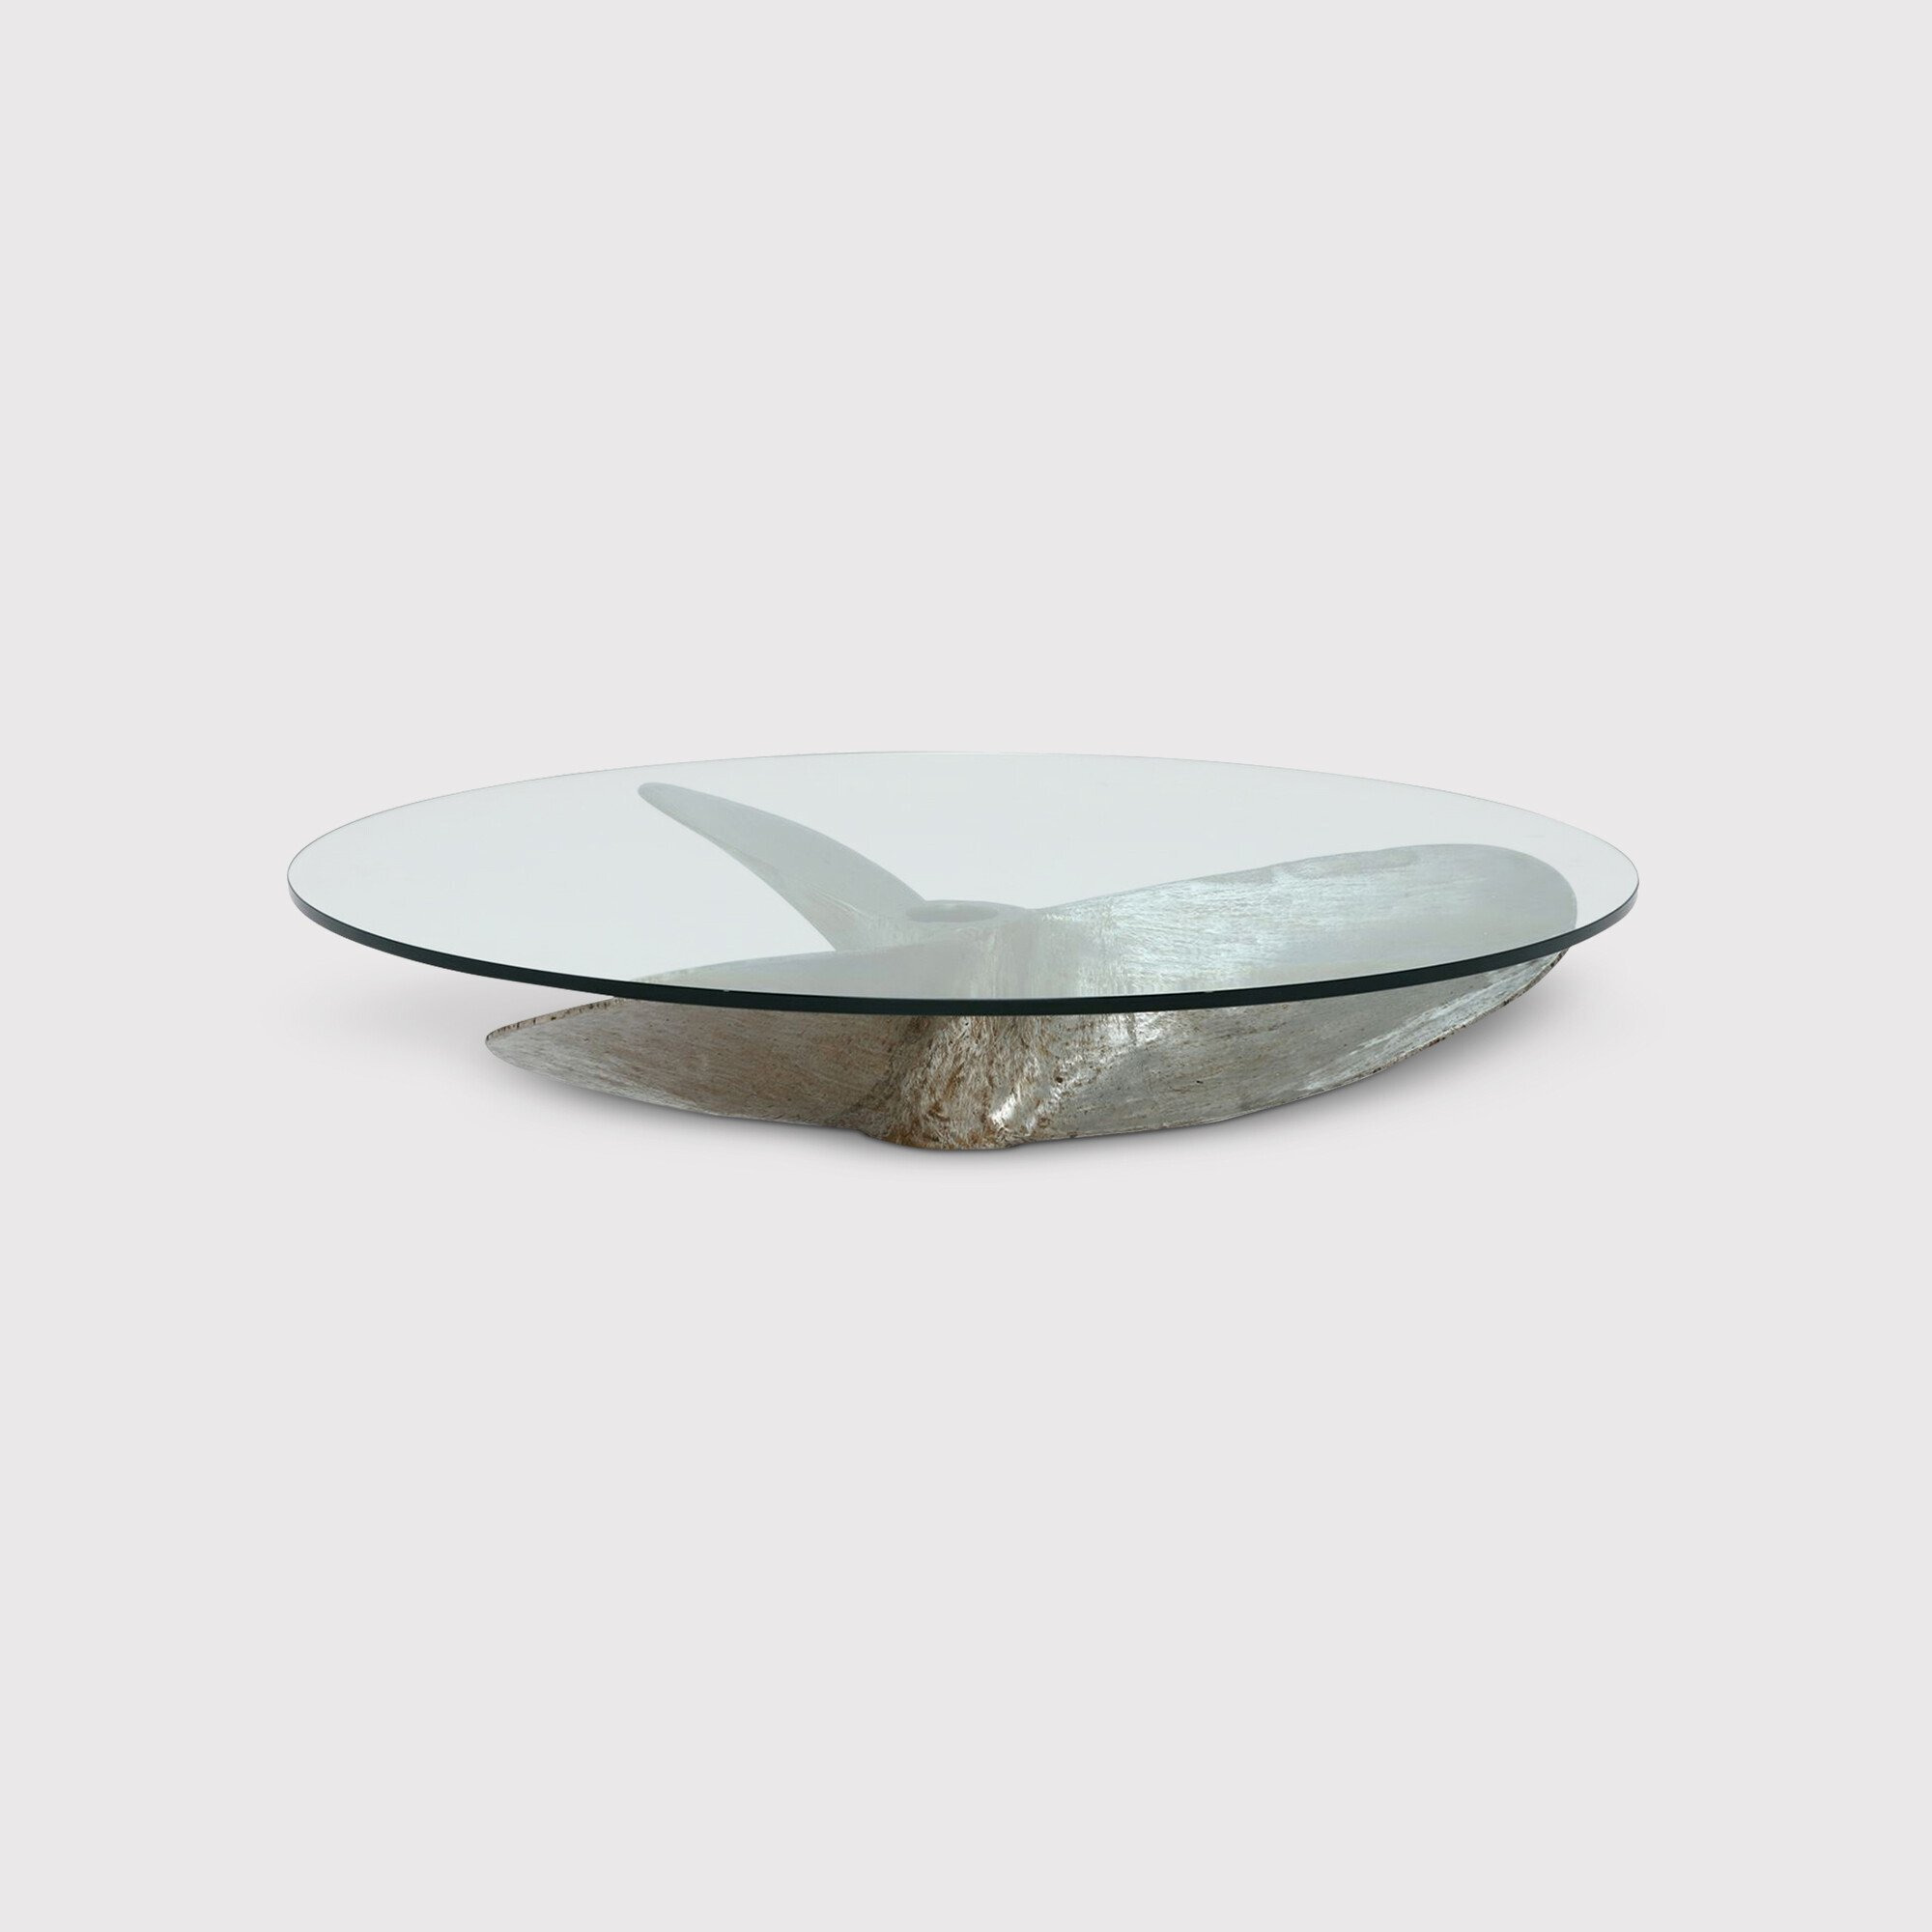 Timothy Oulton Junk Art Propeller Round Coffee Table Small, Silver Glass - Barker & Stonehouse - image 1